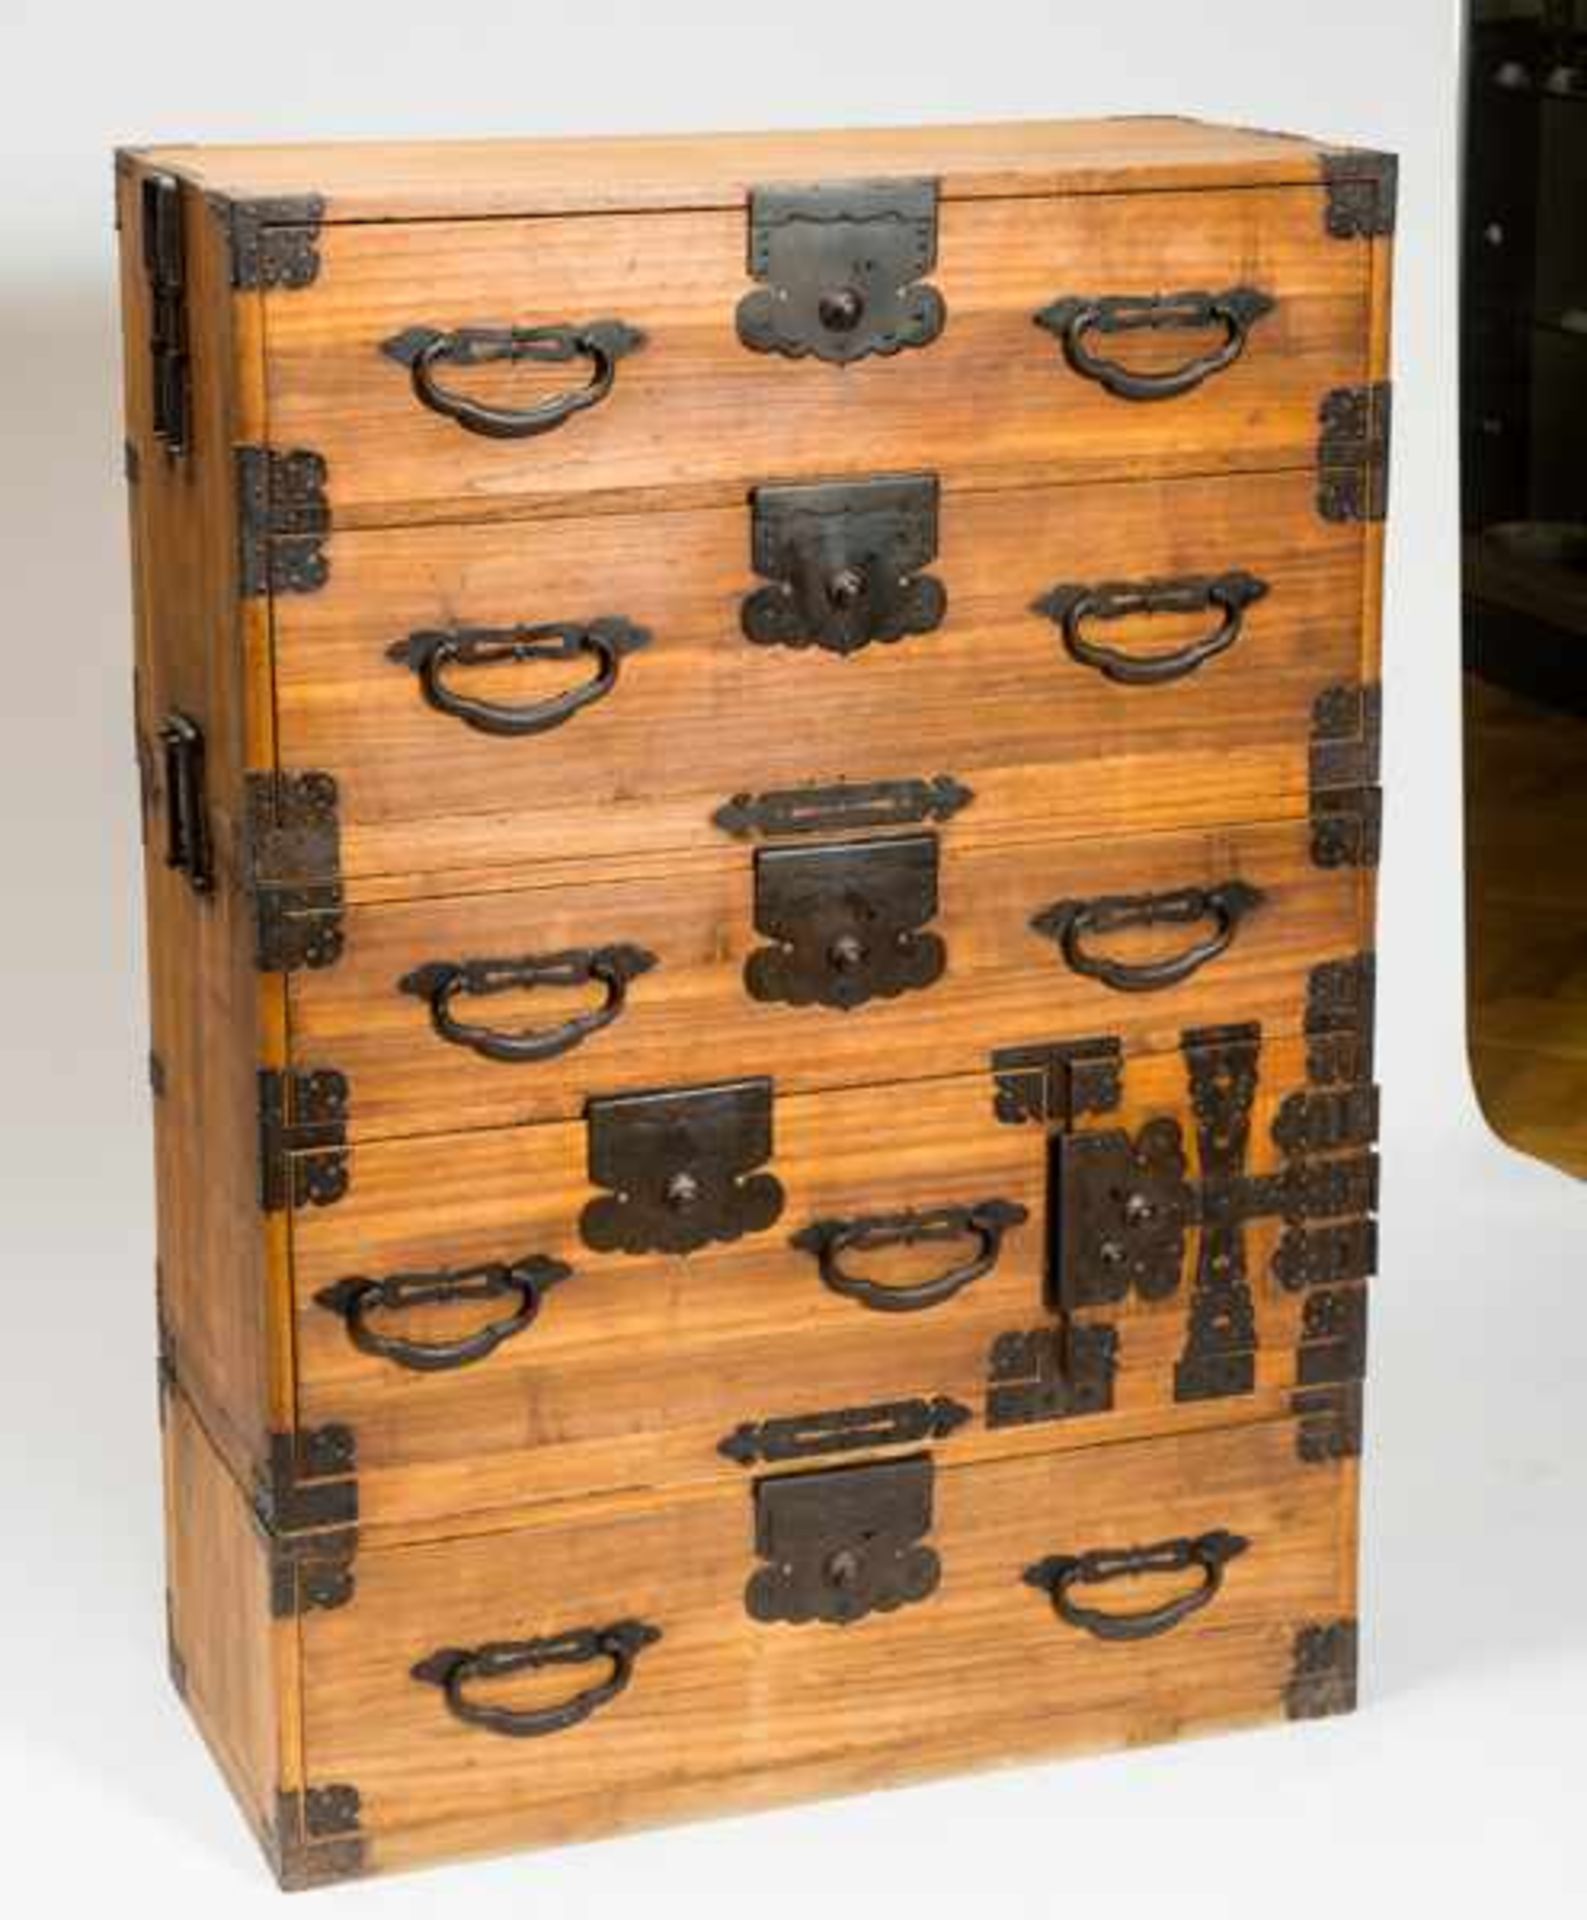 TANSU . Japan, first half of 20 cent.185, 186, 187 THREE TANSU: DRAWERED STORAGE CABINETS The - Image 3 of 5